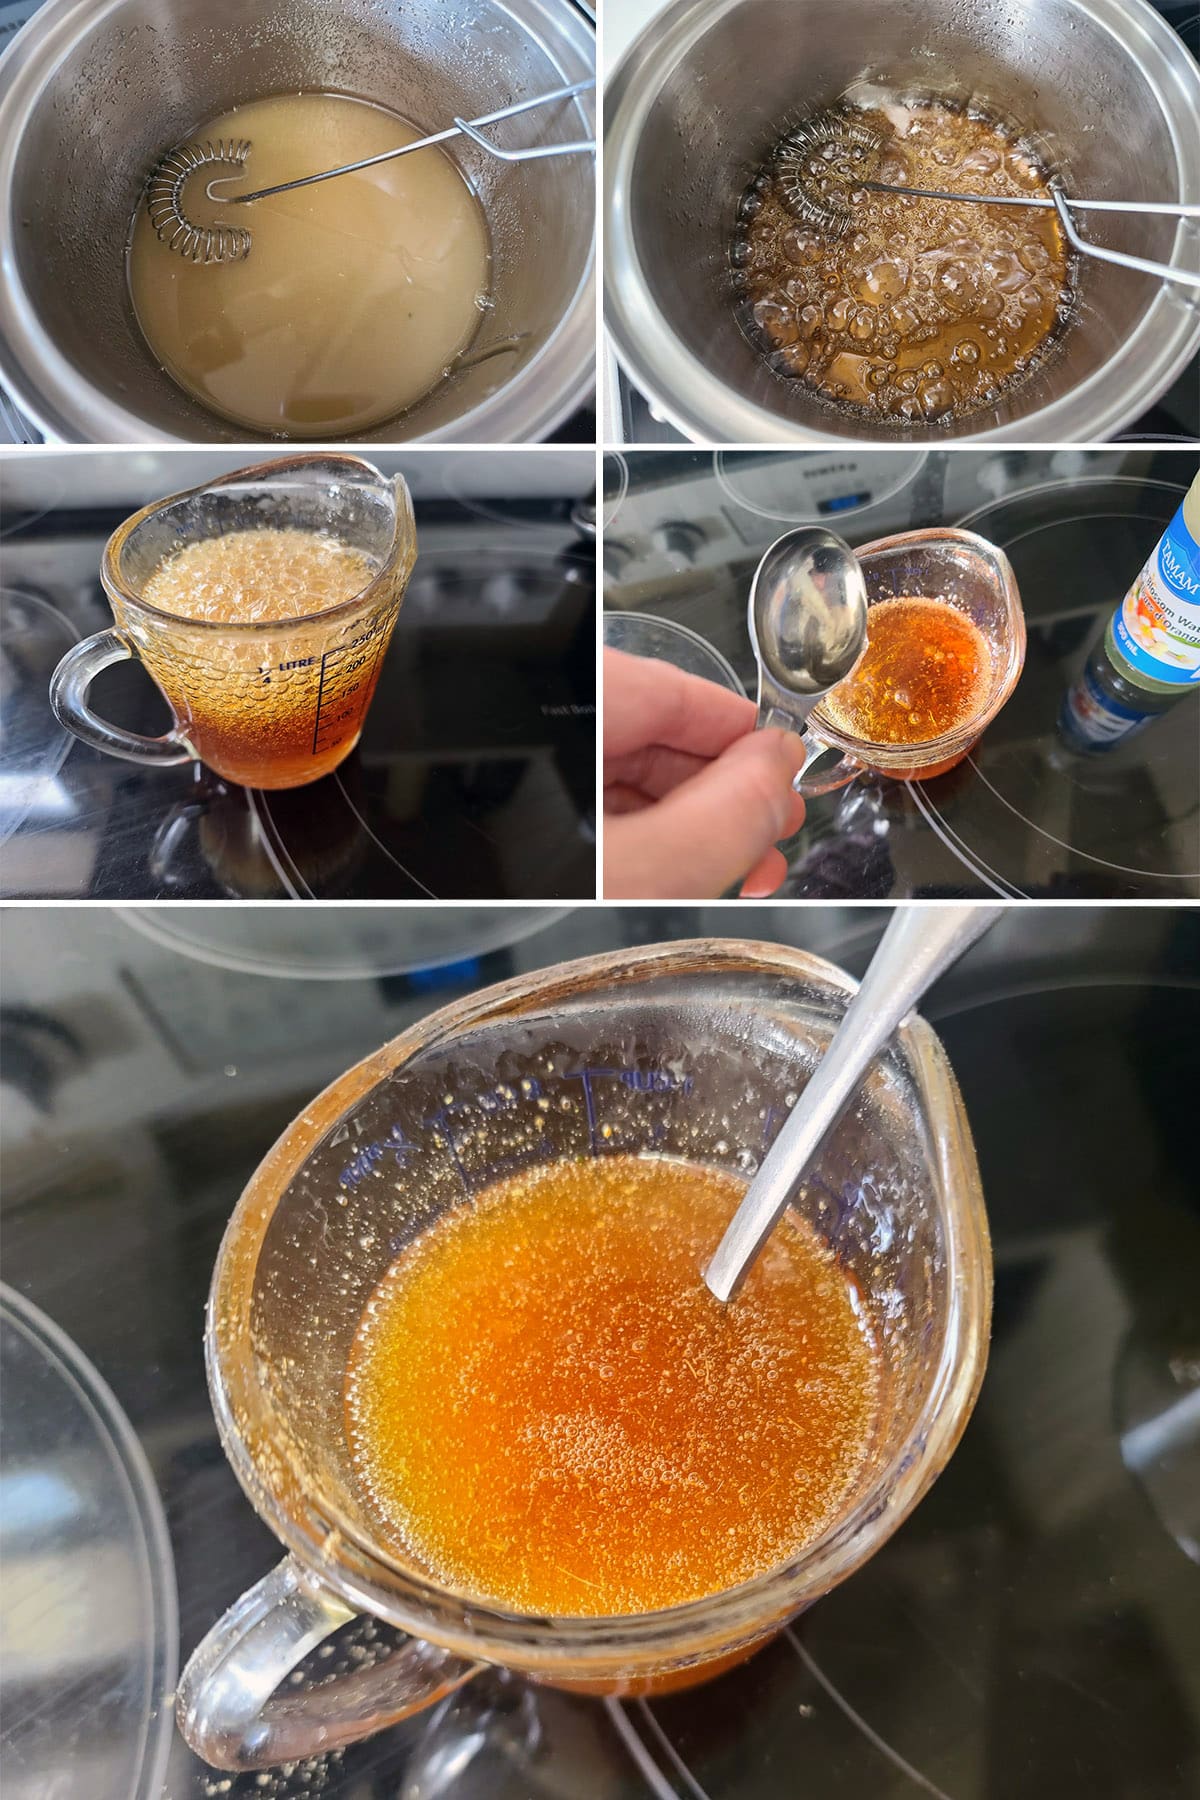 A 5 part image showing the honey syrup being made.